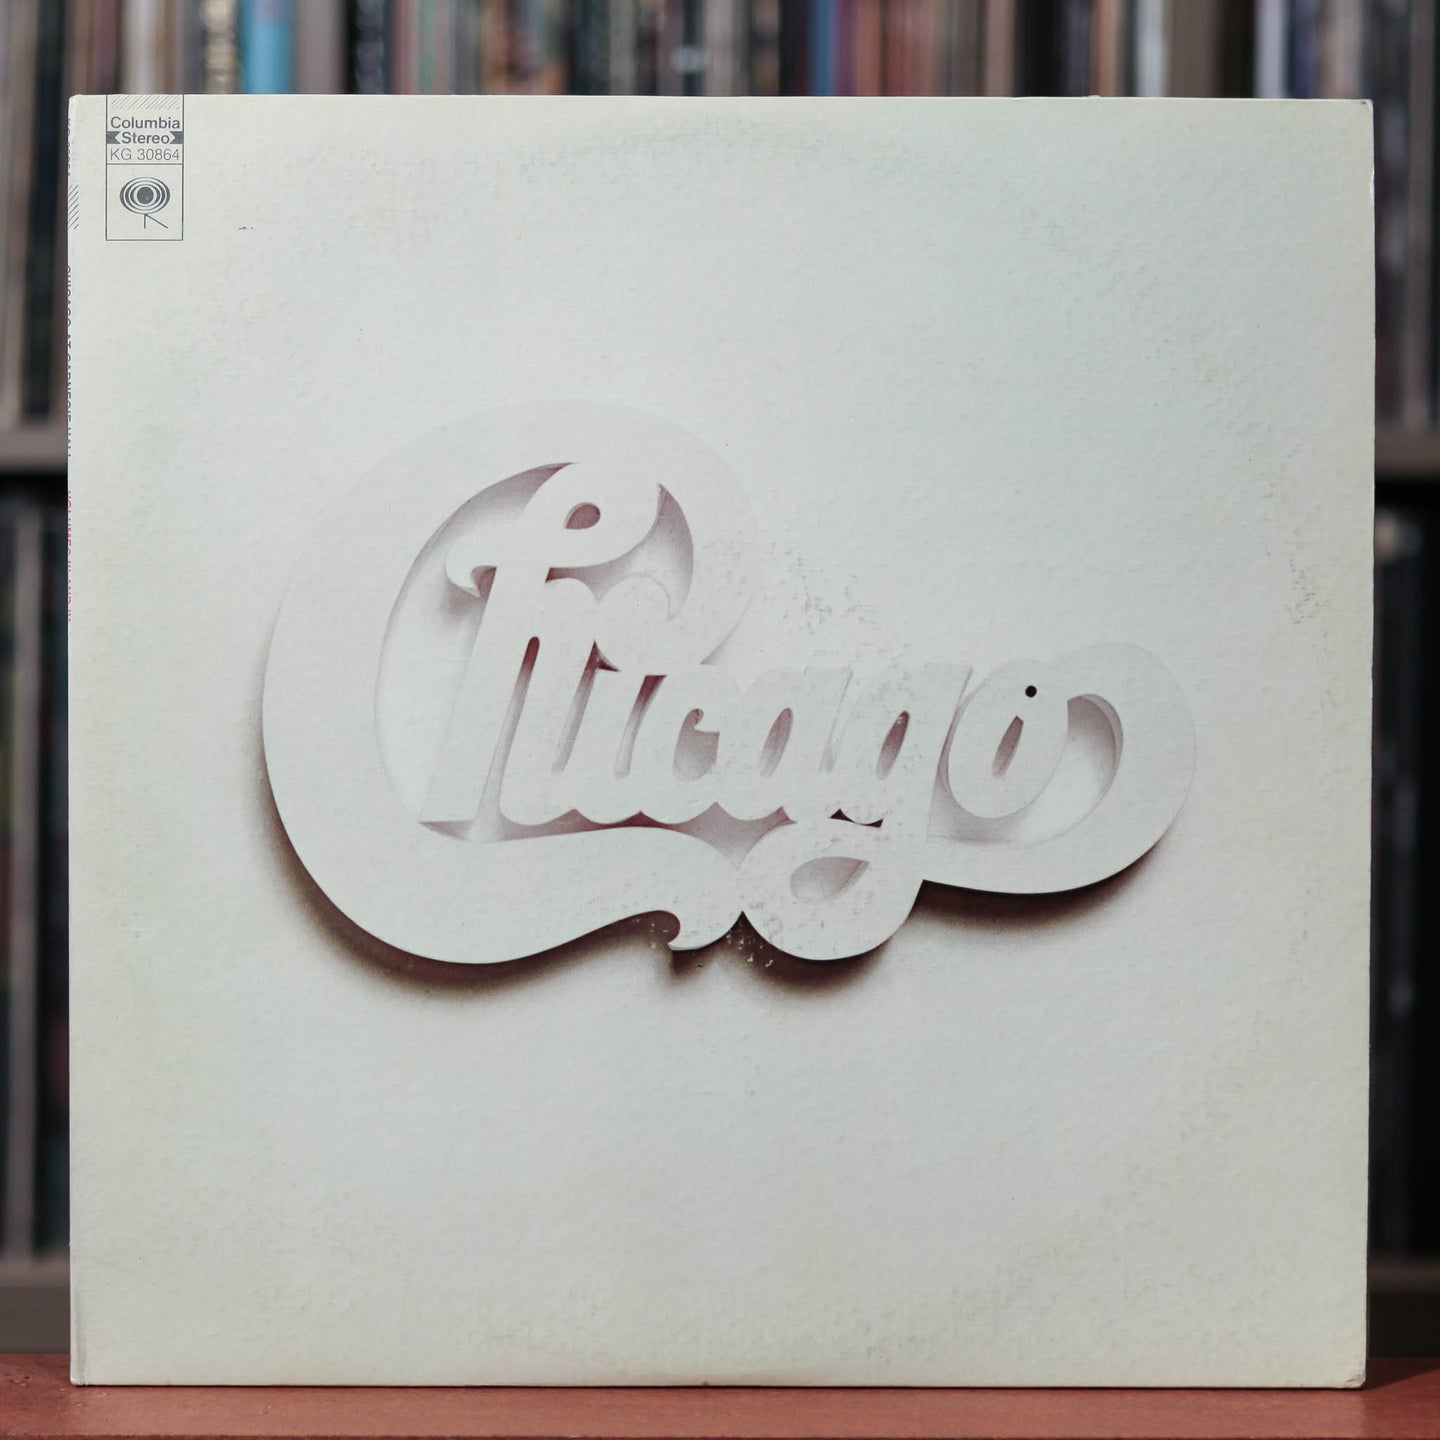 Chicago - Volumes I And II - 2LP - 1971 Columbia, EX/VG w/Poster